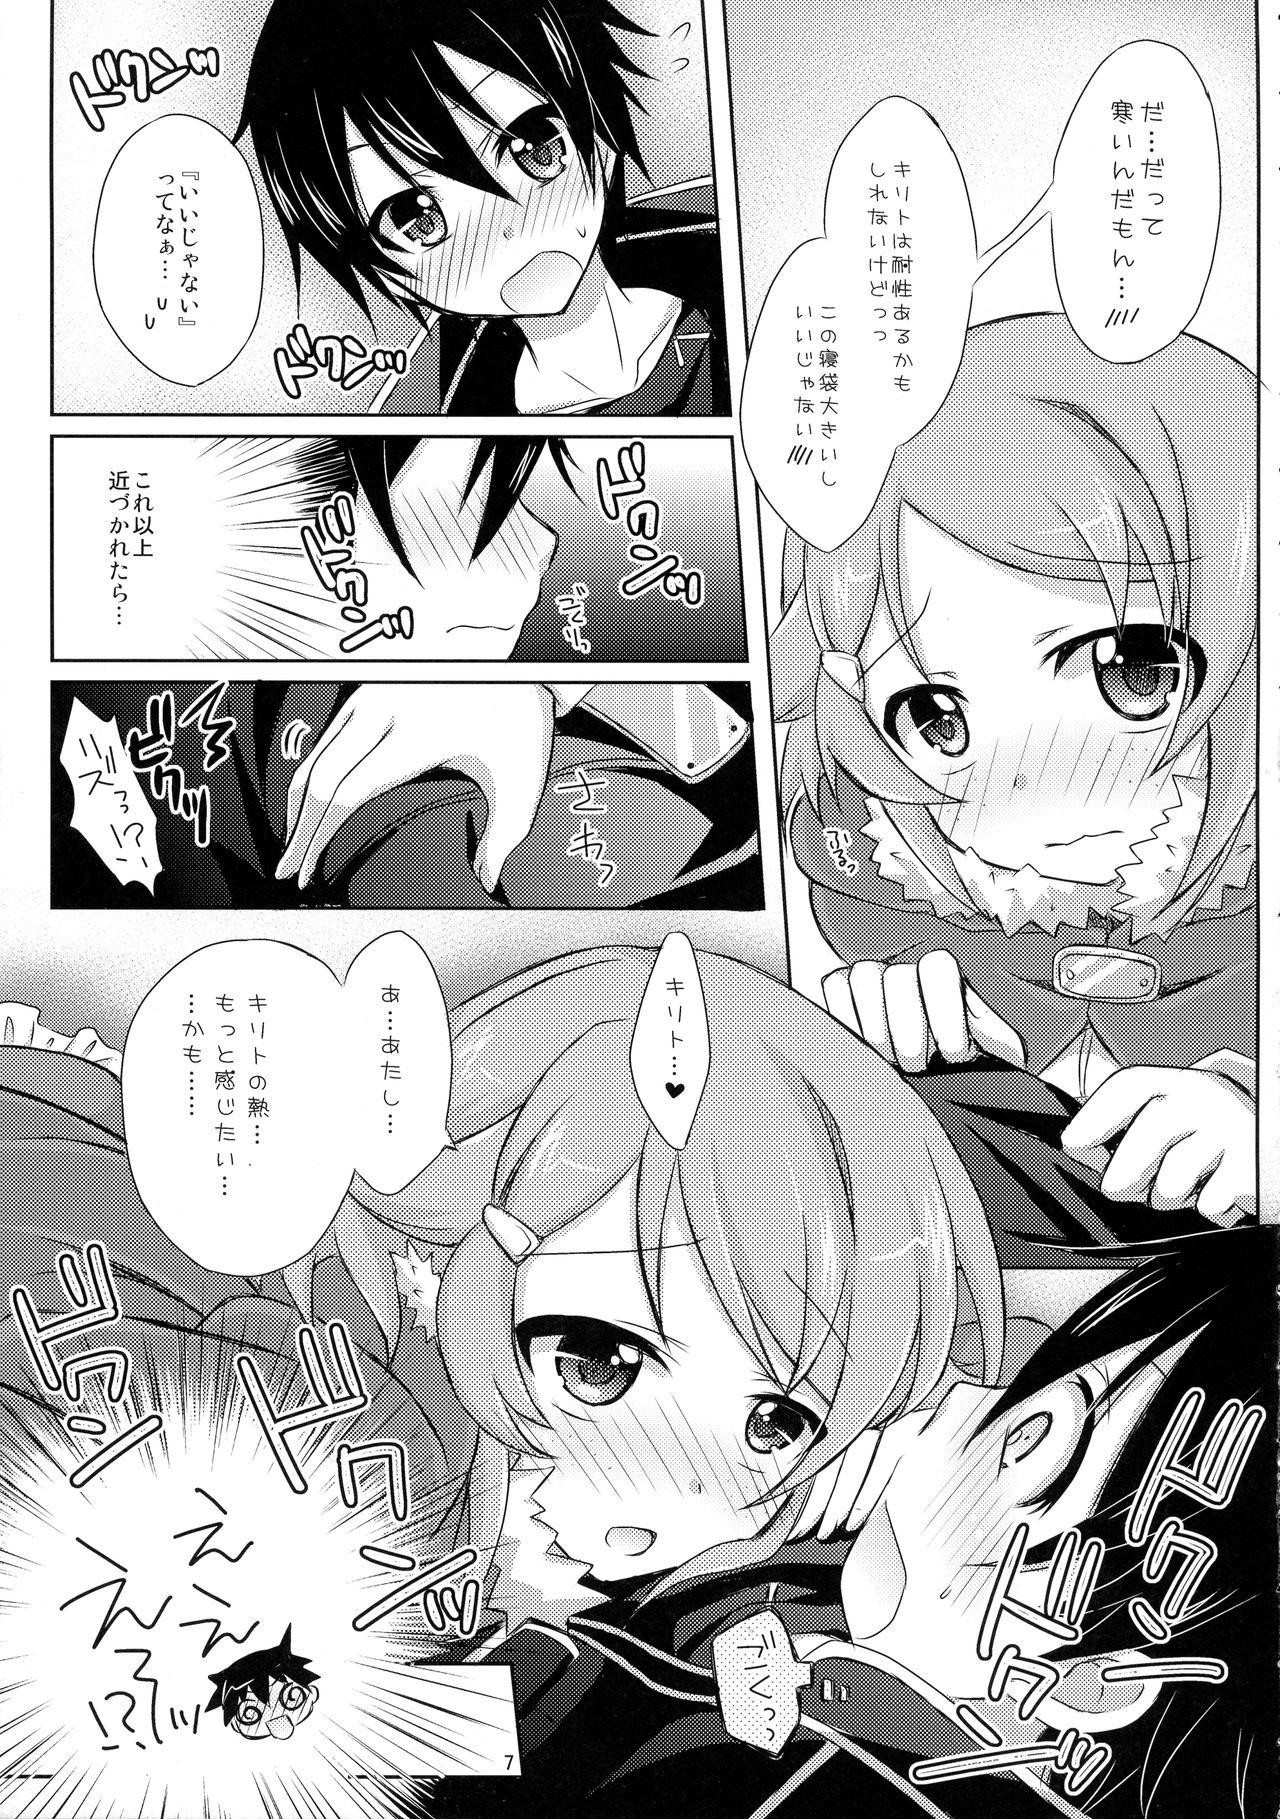 Pinoy Lisbeth Online - Sword art online Transsexual - Page 6